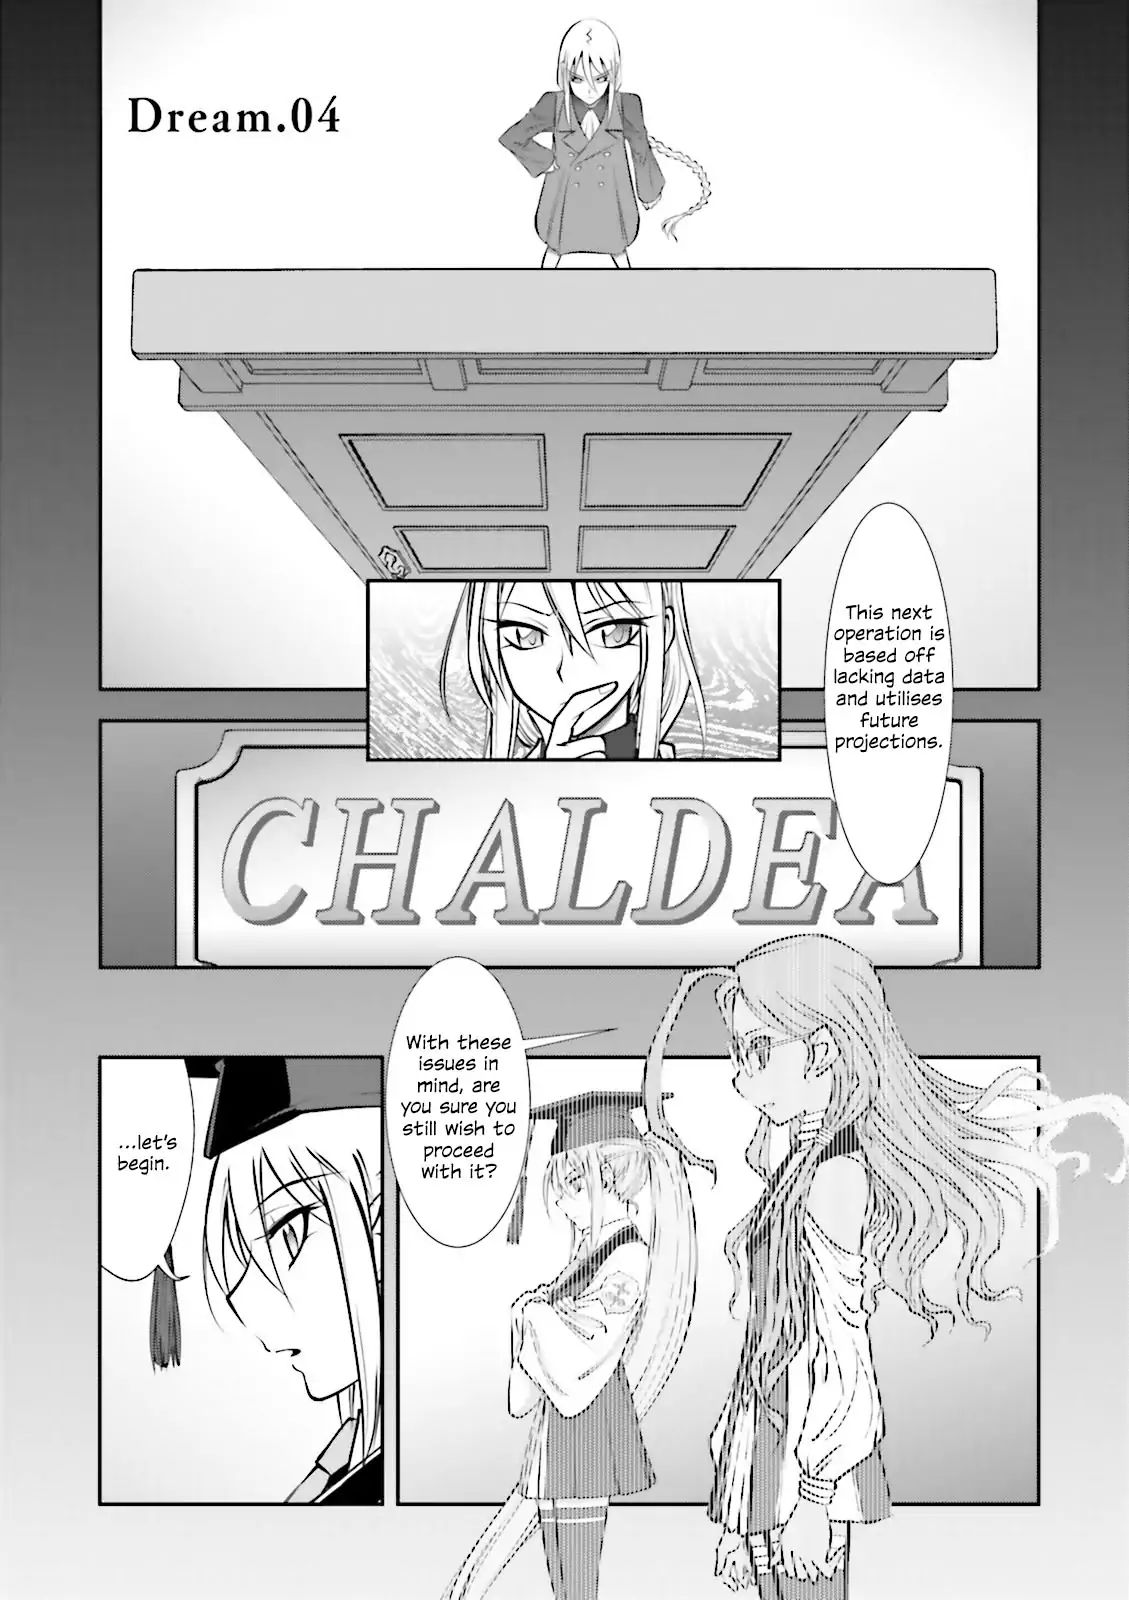 Melty Blood - Back Alley Alliance Nightmare - Page 1